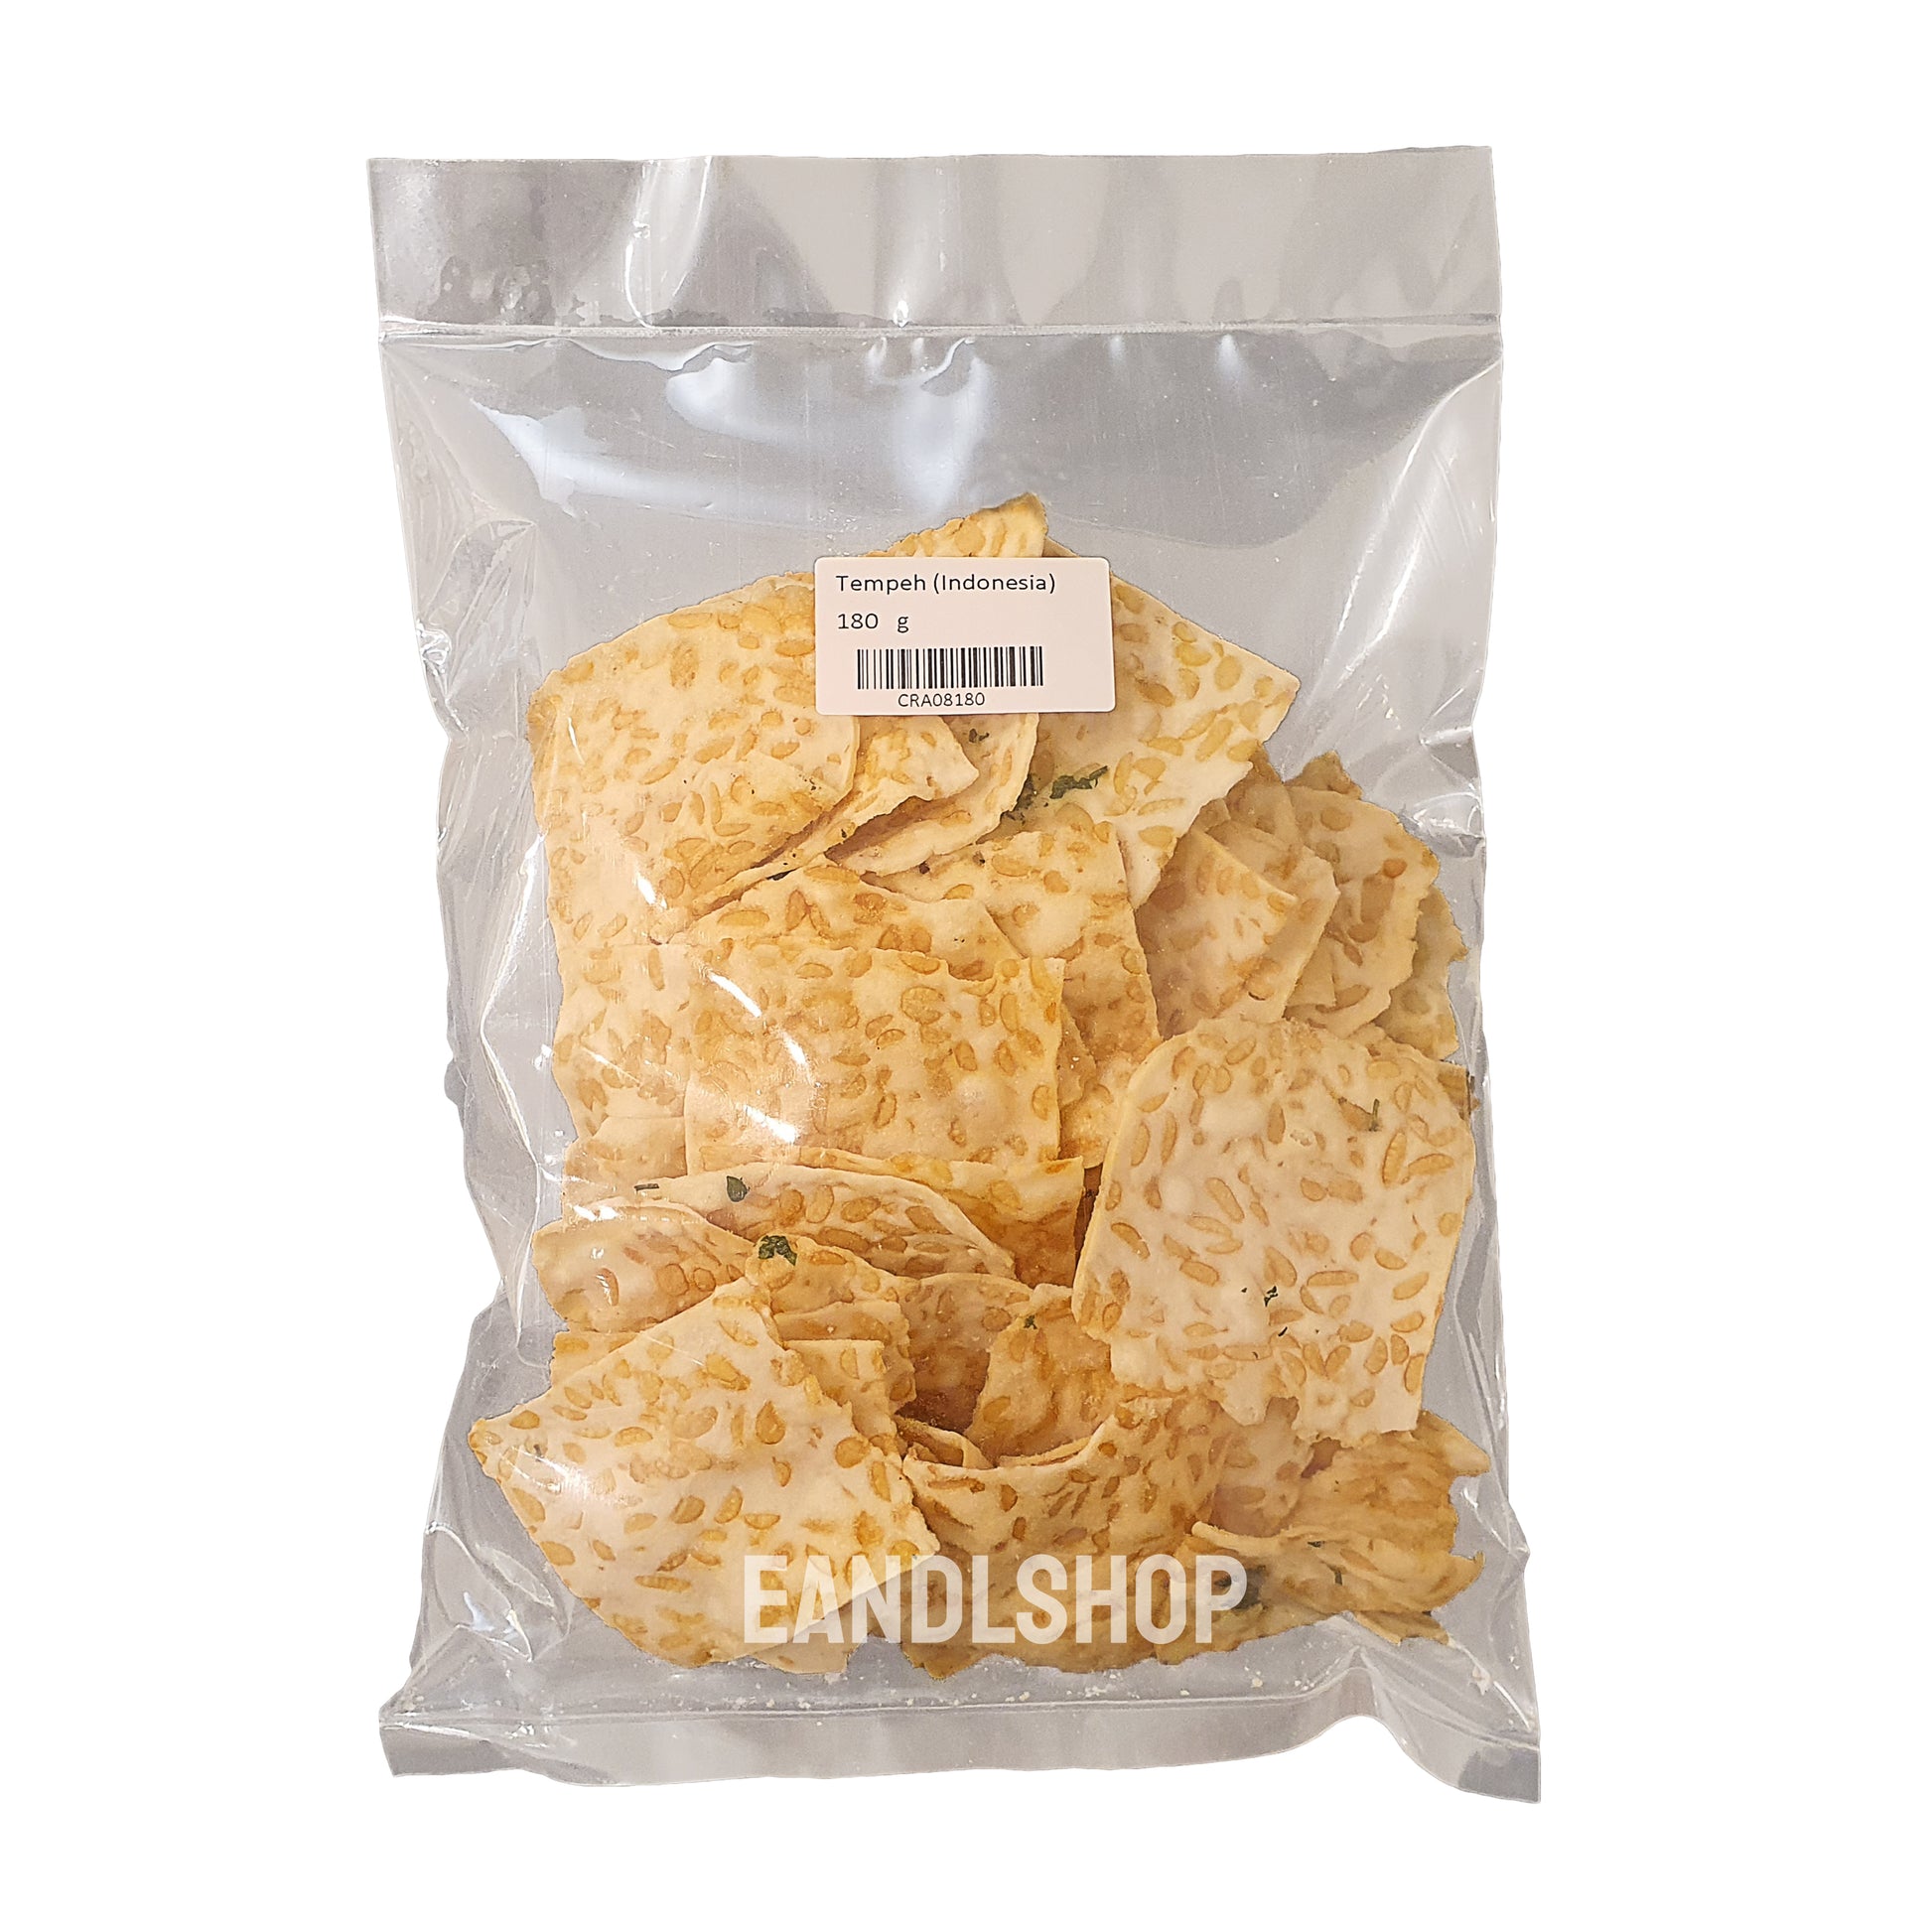 Tempeh Indonesia. Old-school biscuits, modern snacks (chips, crackers), cakes, gummies, plums, dried fruits, nuts, herbal tea – available at www.EANDLSHOP.com